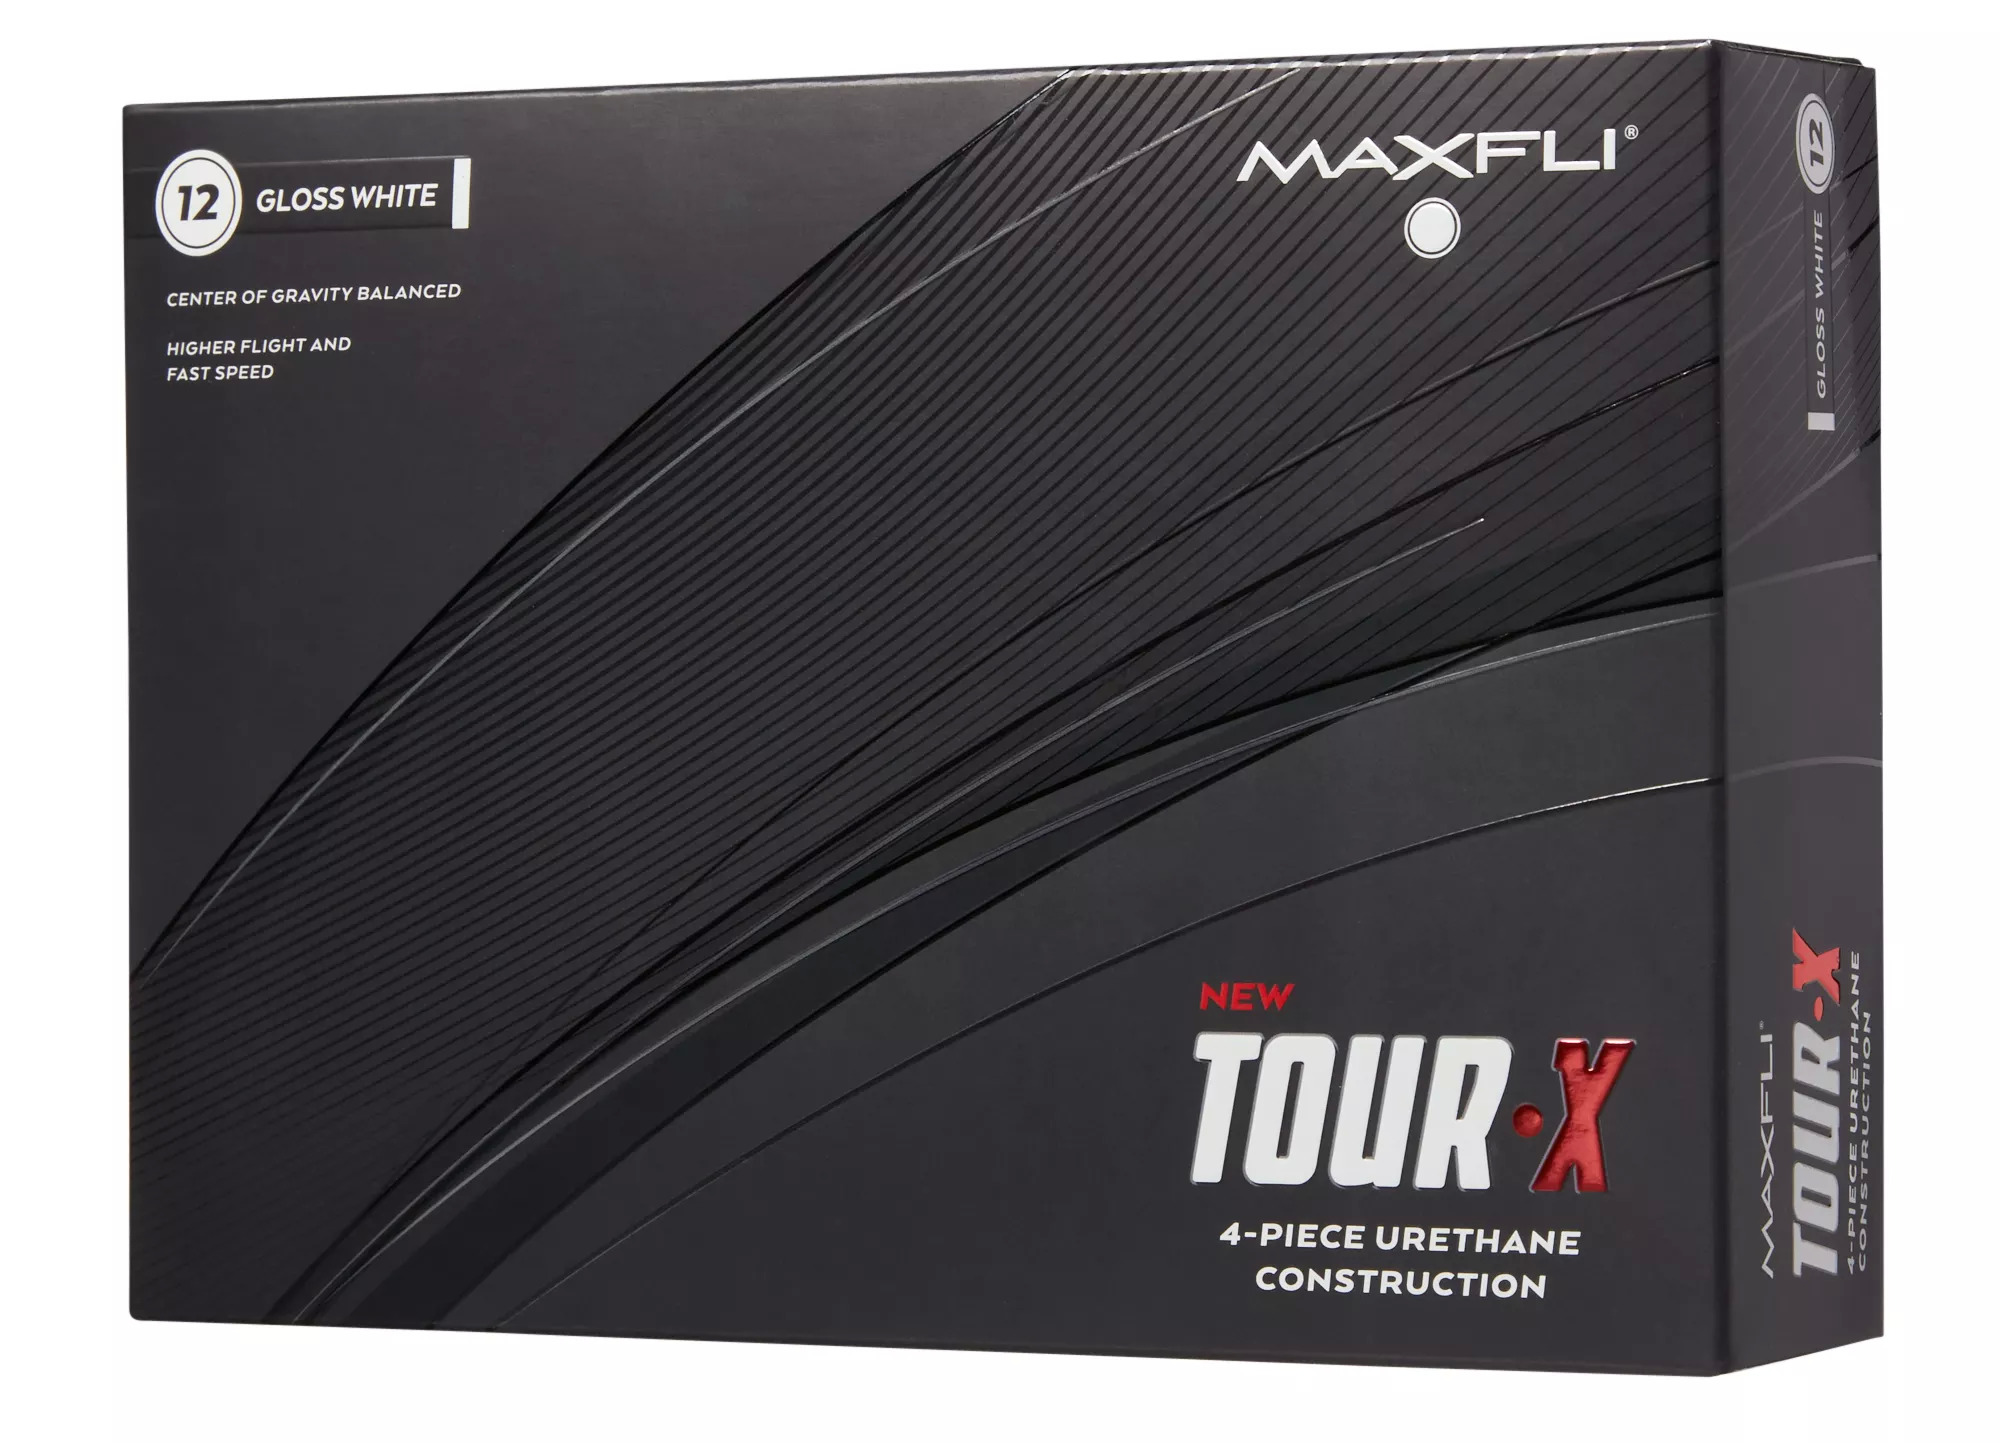 Maxfli Golf ball deals.  Buy 6 boxes for $150 in app only at Dicks - $150